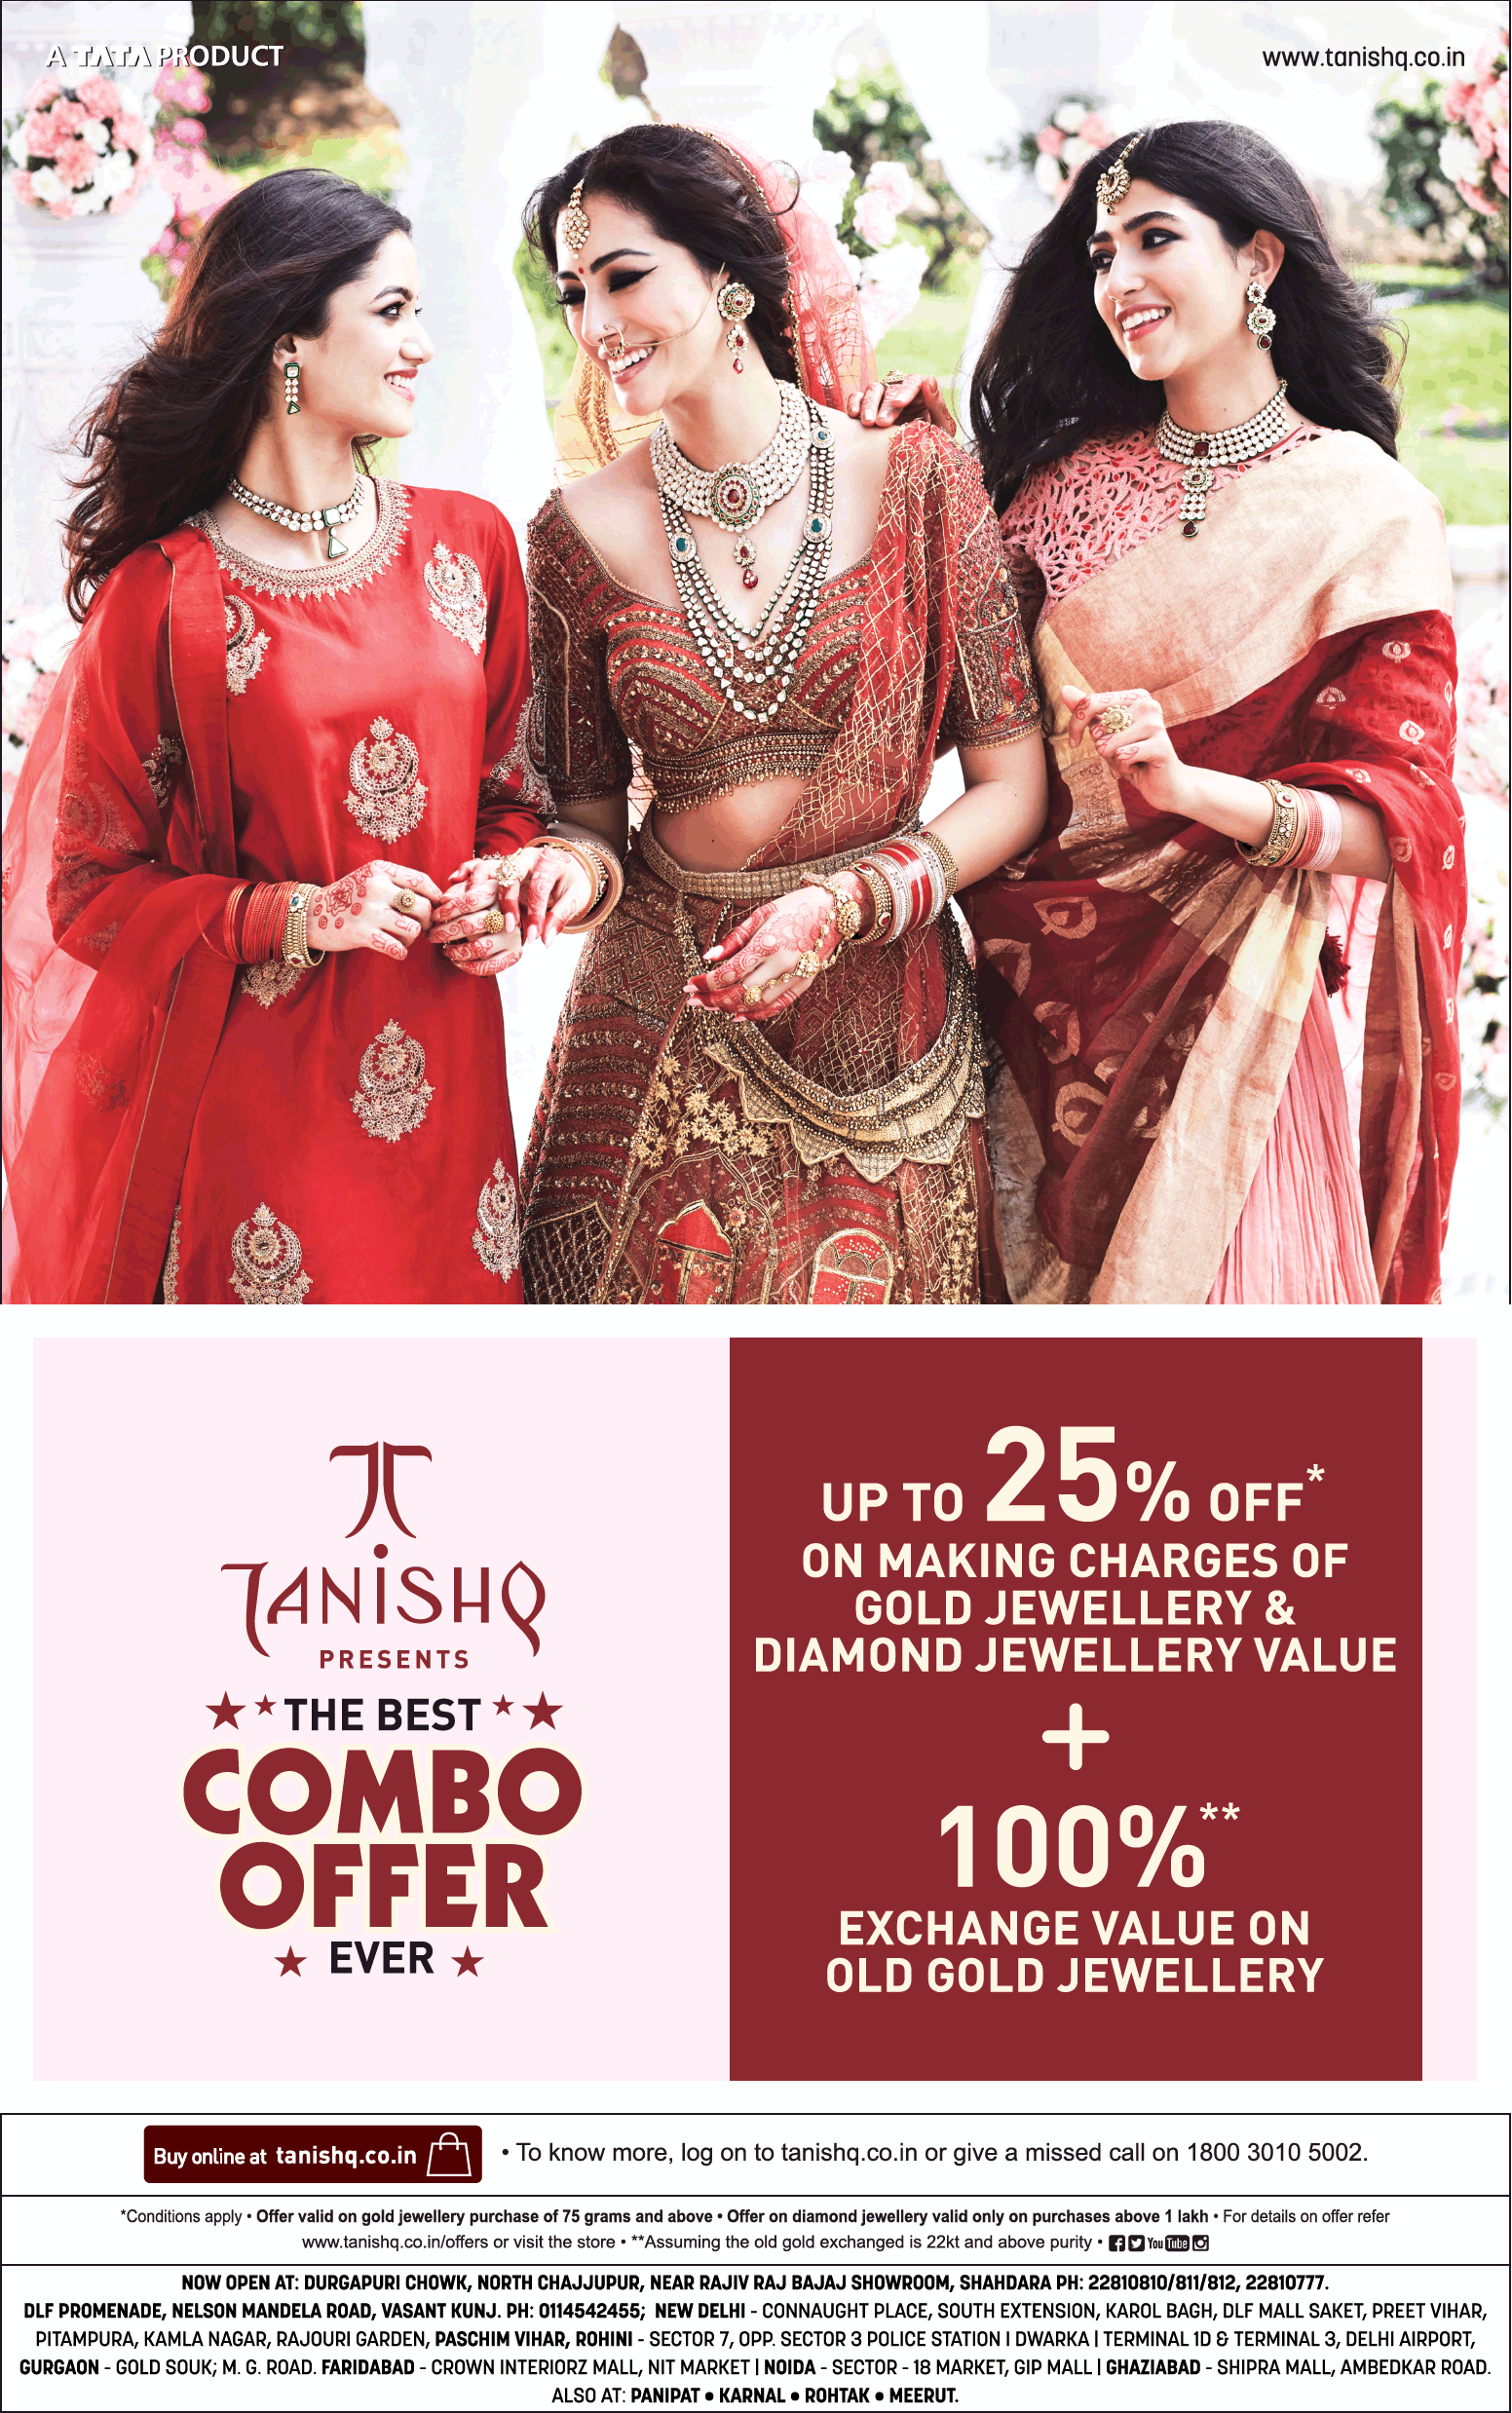 tanishq-presents-the-best-combo-offer-ever-100%-value-on-old-gold-jewellery-ad-delhi-times-07-06-2019.png